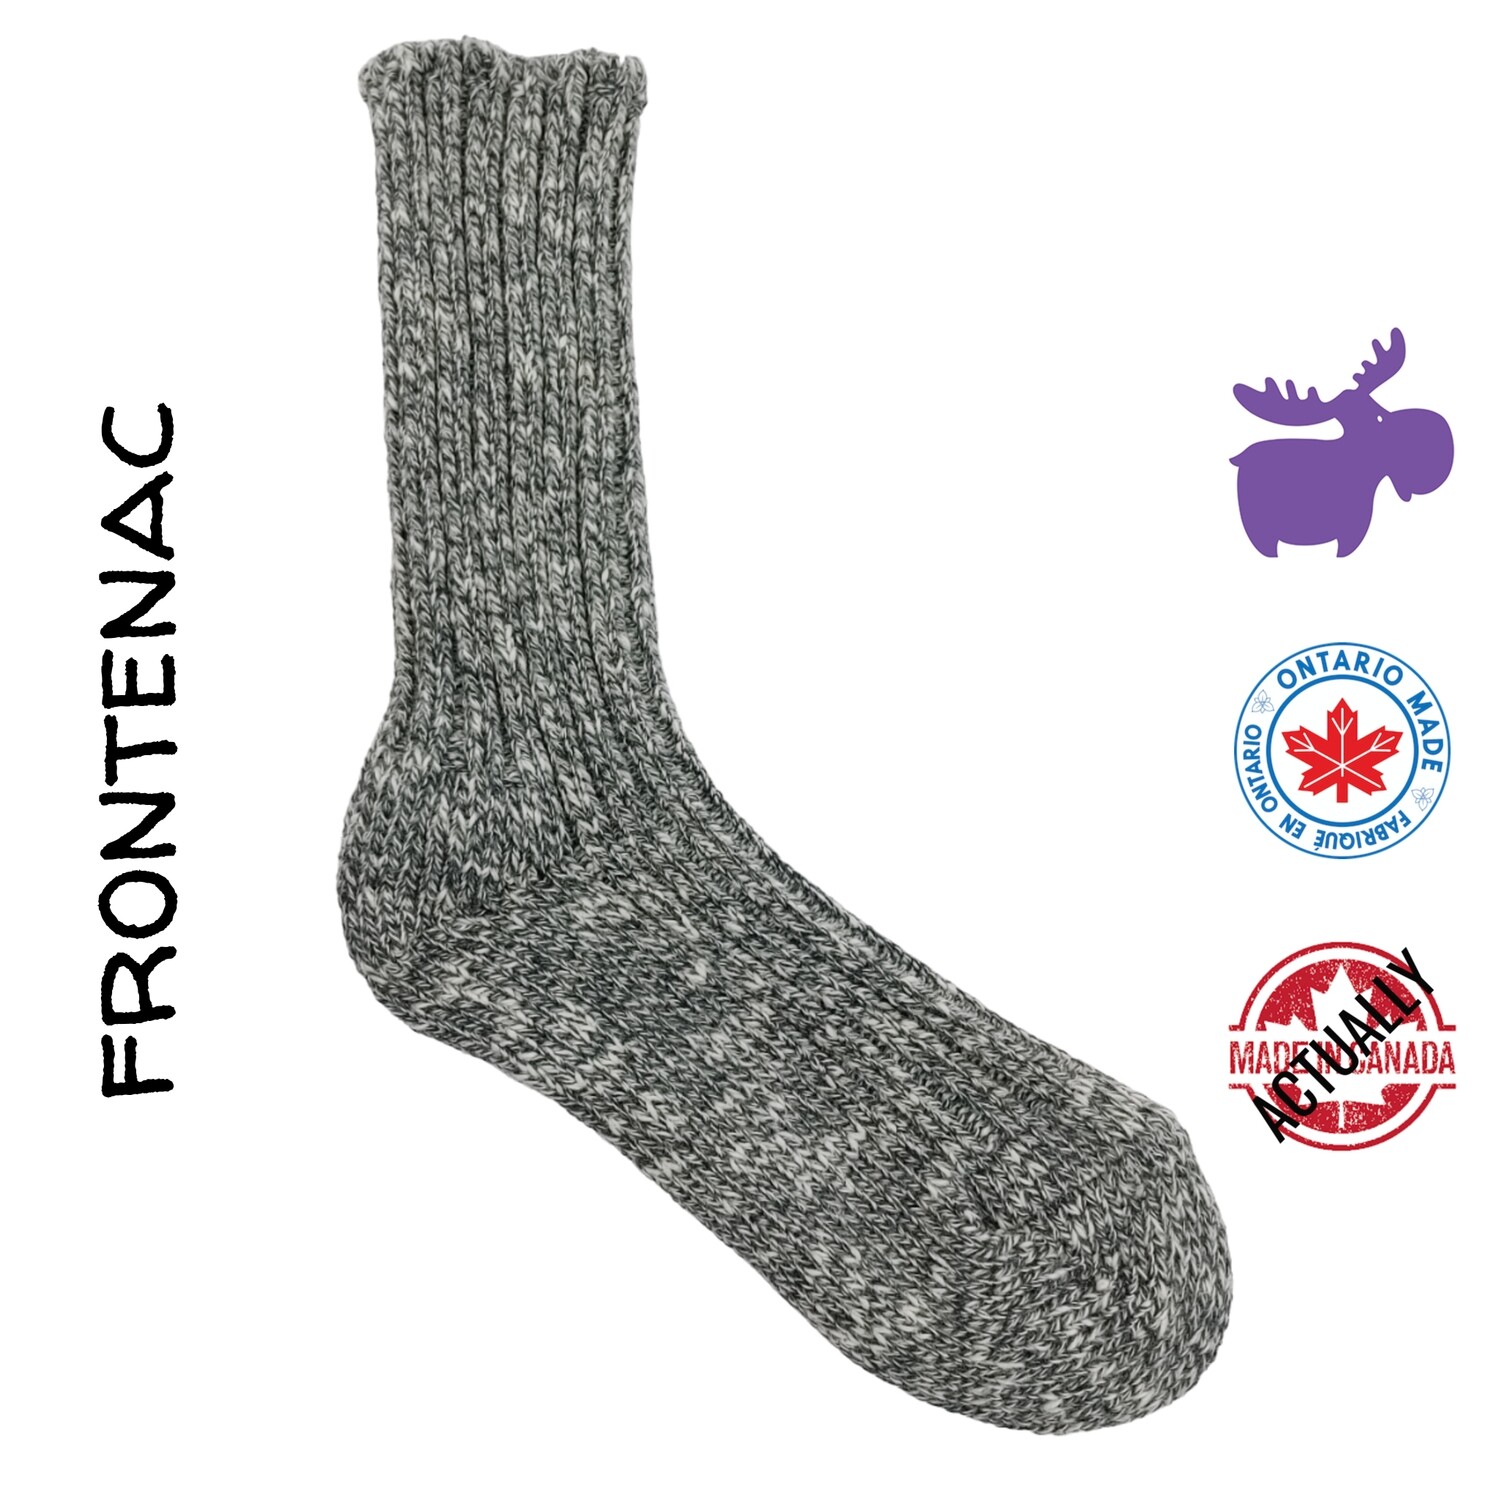 Frontenac Cotton/Wool Boot Sock in Something About Grey | One Size Fits Most | Actually Made in Canada by Purple Moose